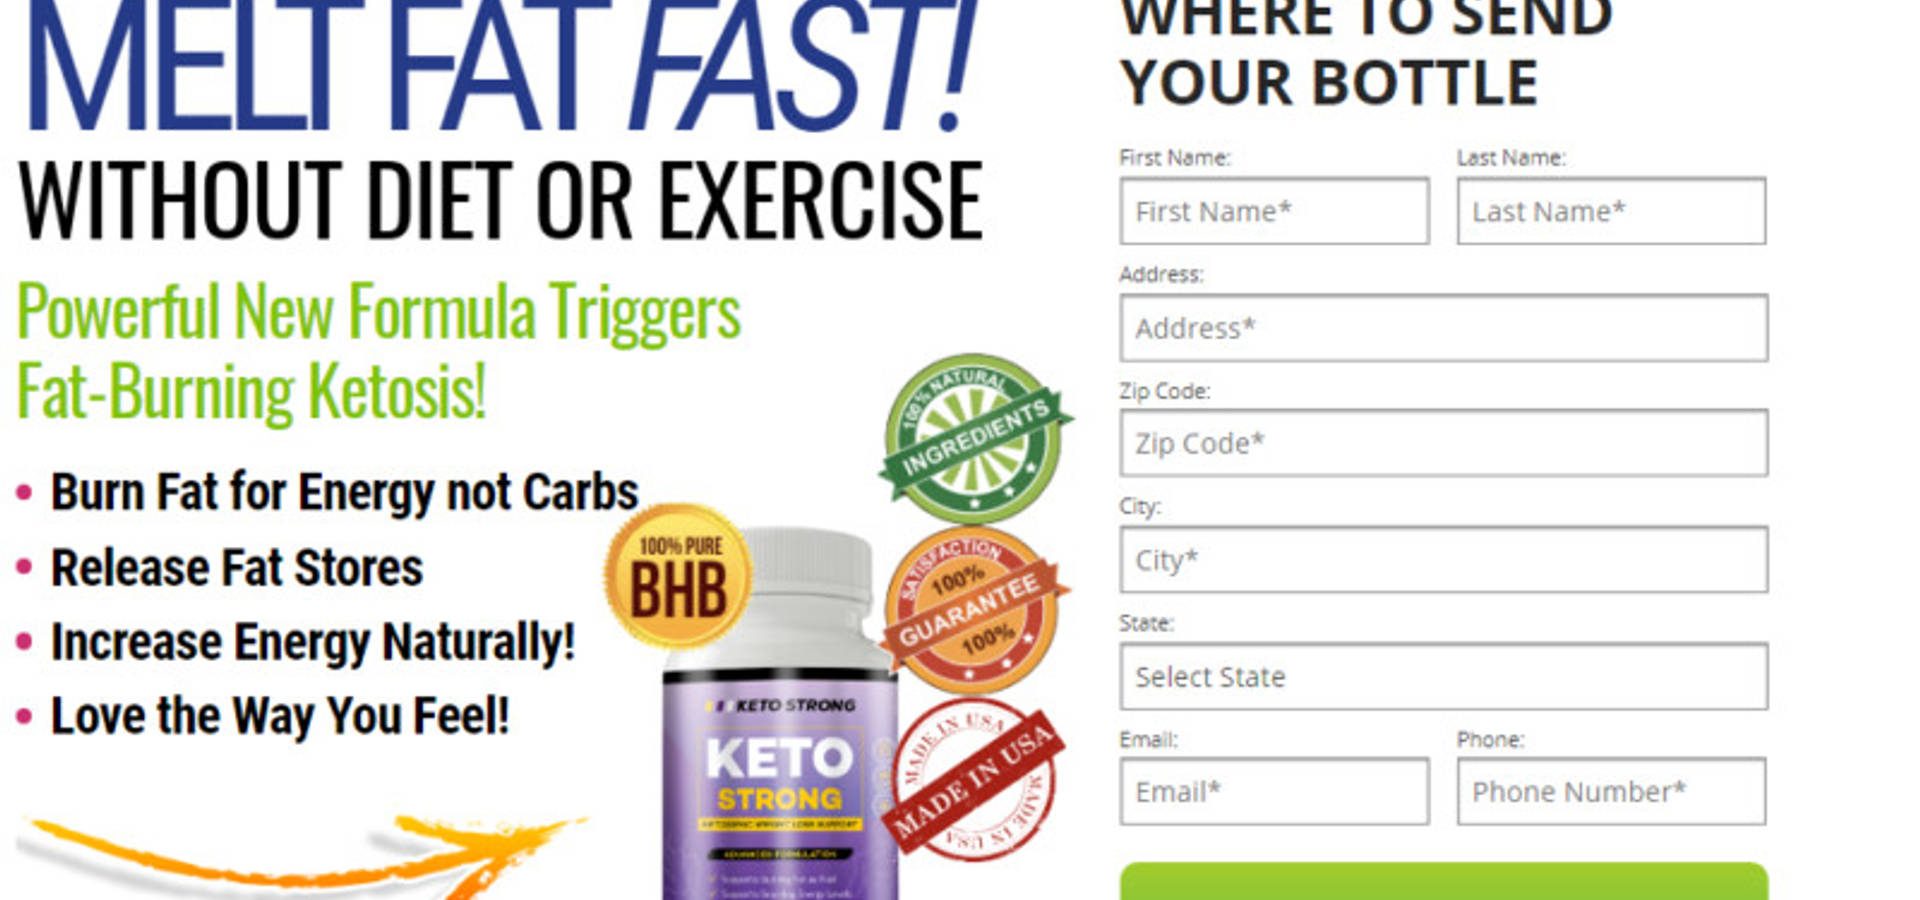 Keto Strong Reviews - Diet Pills That Work? Know This First! - Homer News